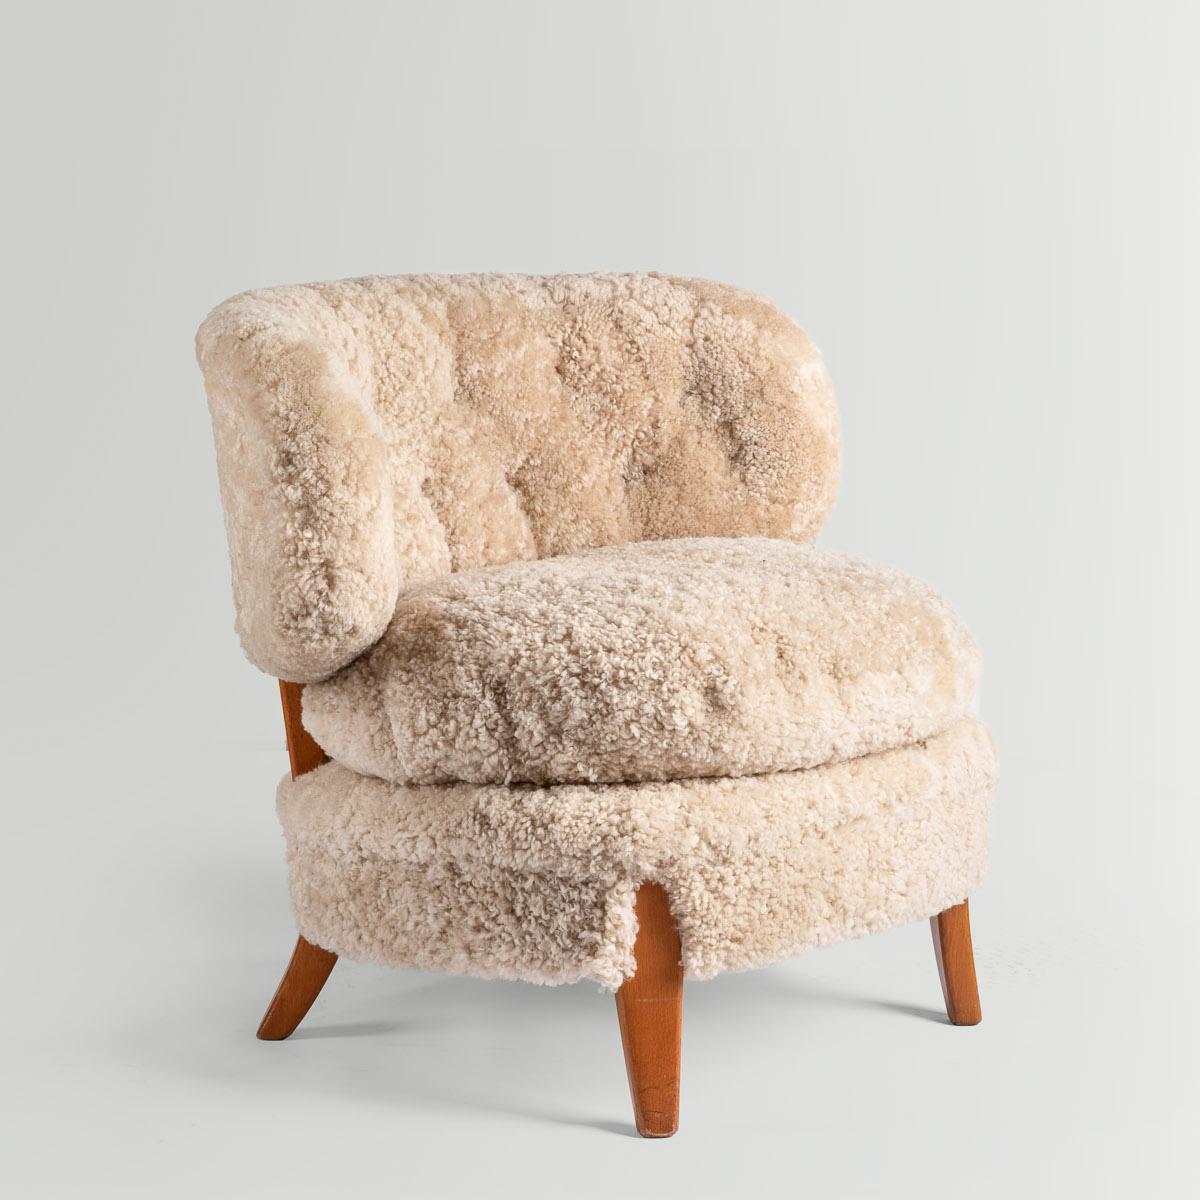 Lounge chair model Schulz designed by Otto Schulz and produced by Boet in Sweden, 1940s.
The chair was newly reupholstered in premium sheepskin.

Date of manufacture: 1940s
Origin: Sweden
Material: Beech, Sheepskin
Dimensions: H 73 cm x W 84 cm x D